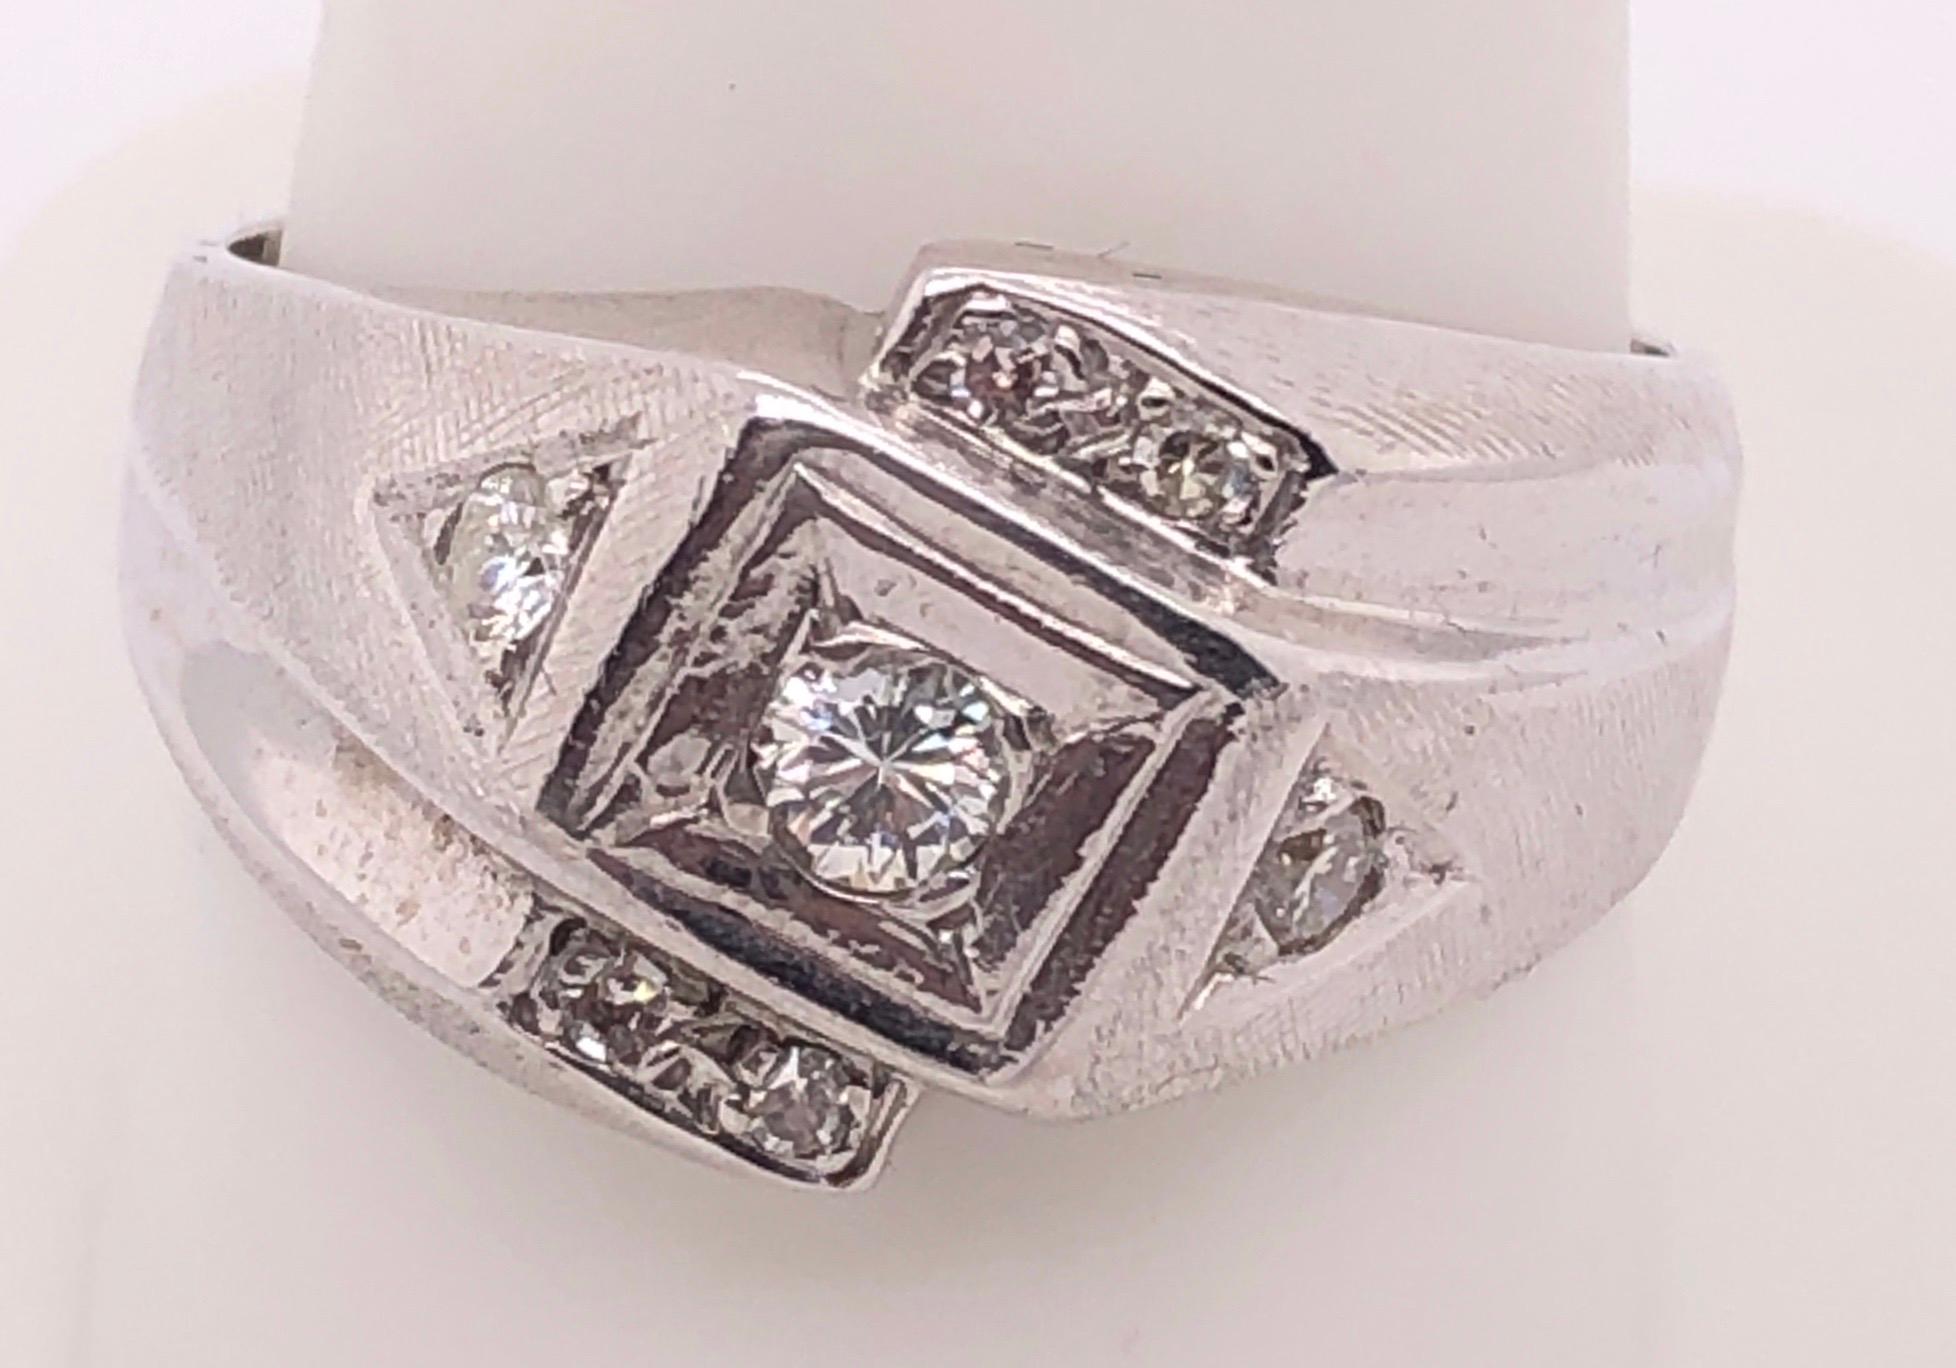 14 Karat White Gold Contemporary Diamond Solitaire with Diamond Accents Ring
0.75 total diamond weight
Size 10.5
8.41 grams total weight.